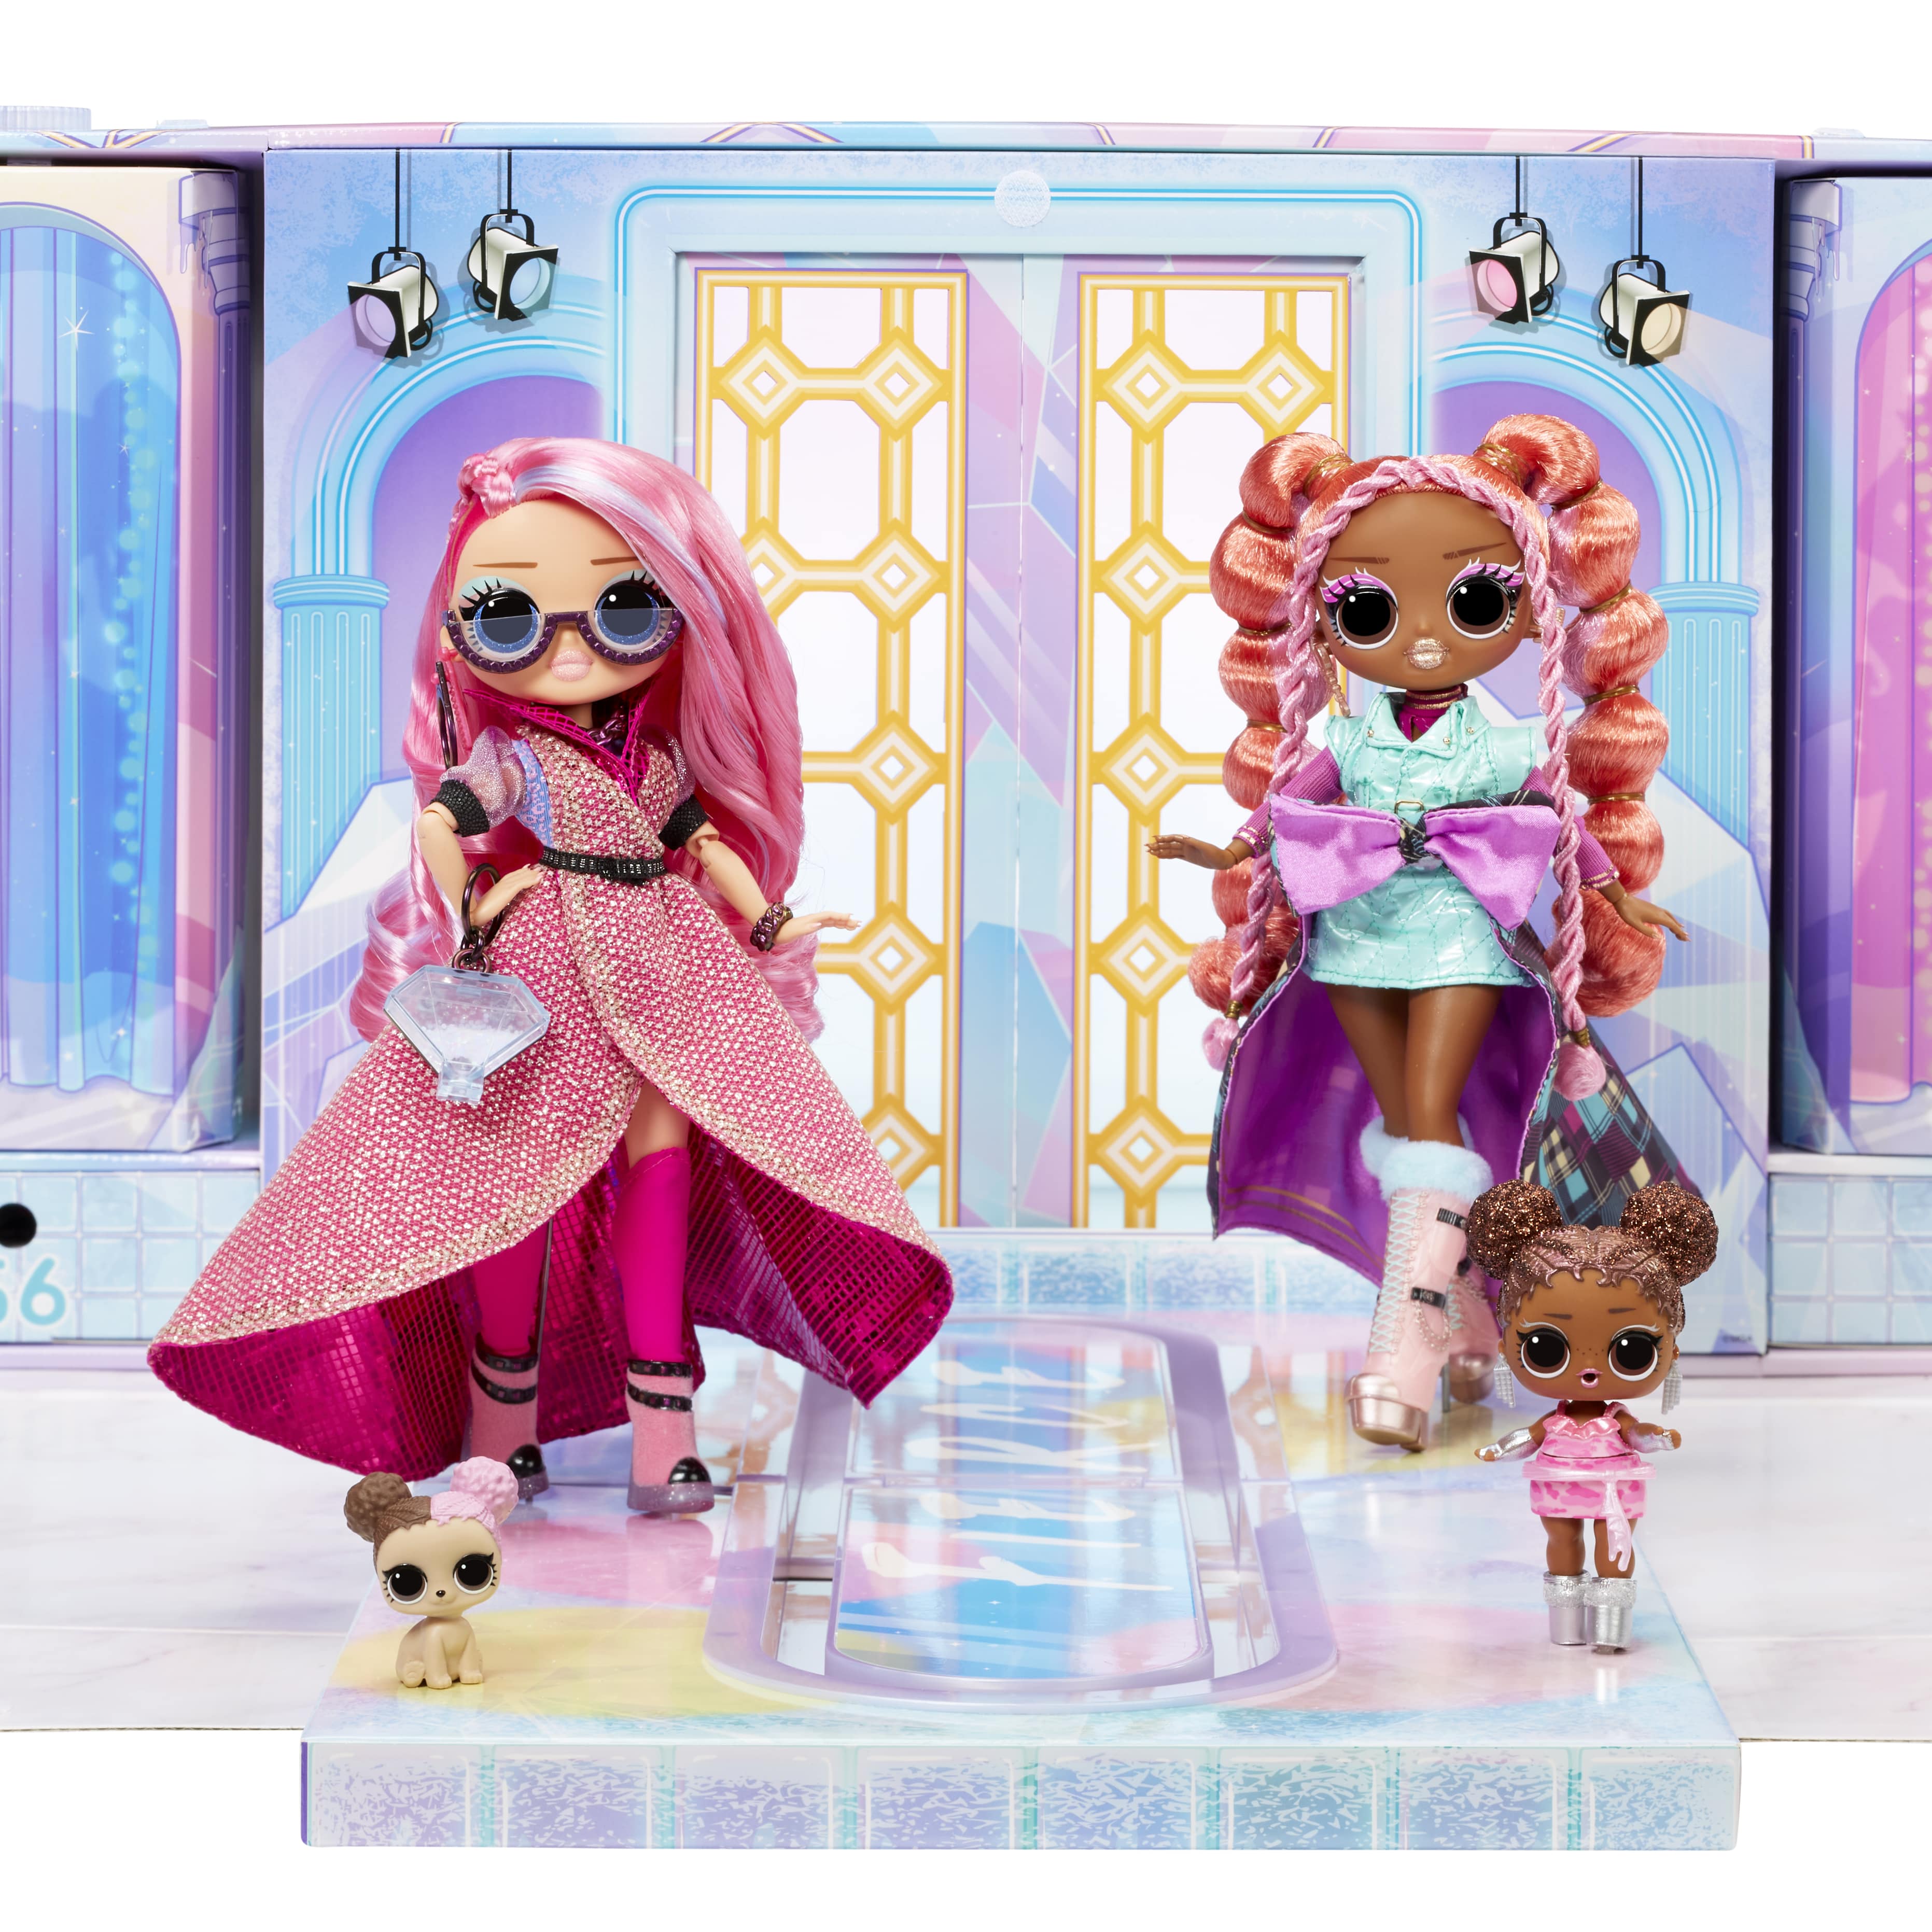 LOL Surprise Doll Fashion Show Mega Runway Playset with 80 Surprises, Ages 4 and up - image 7 of 7